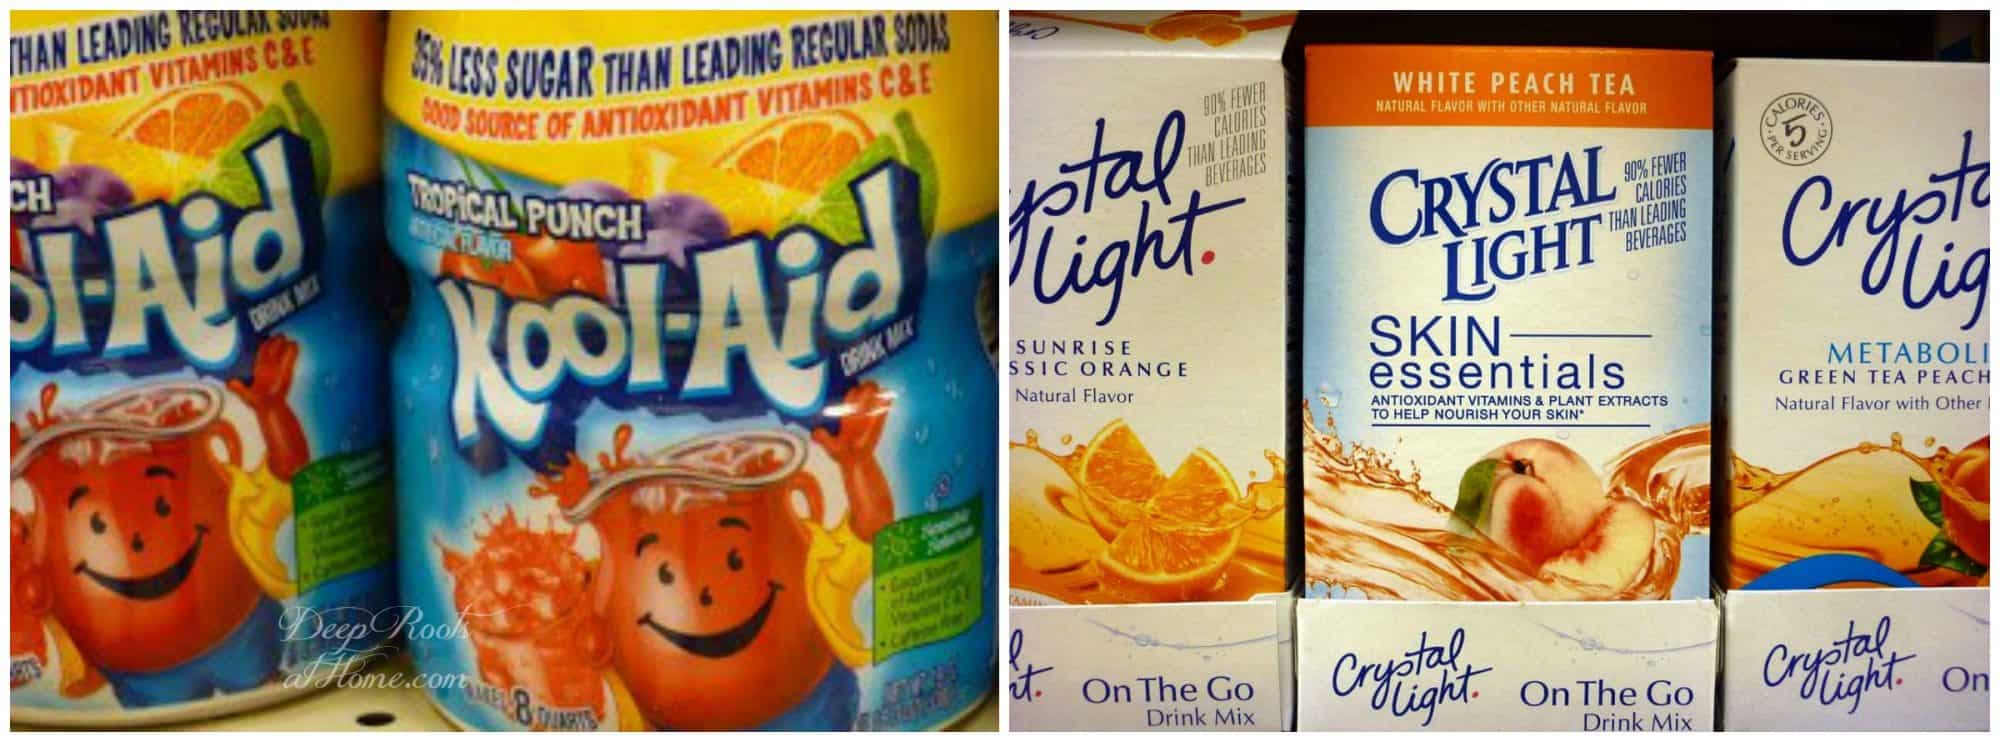  Kool-Aid punch and Crystal Light